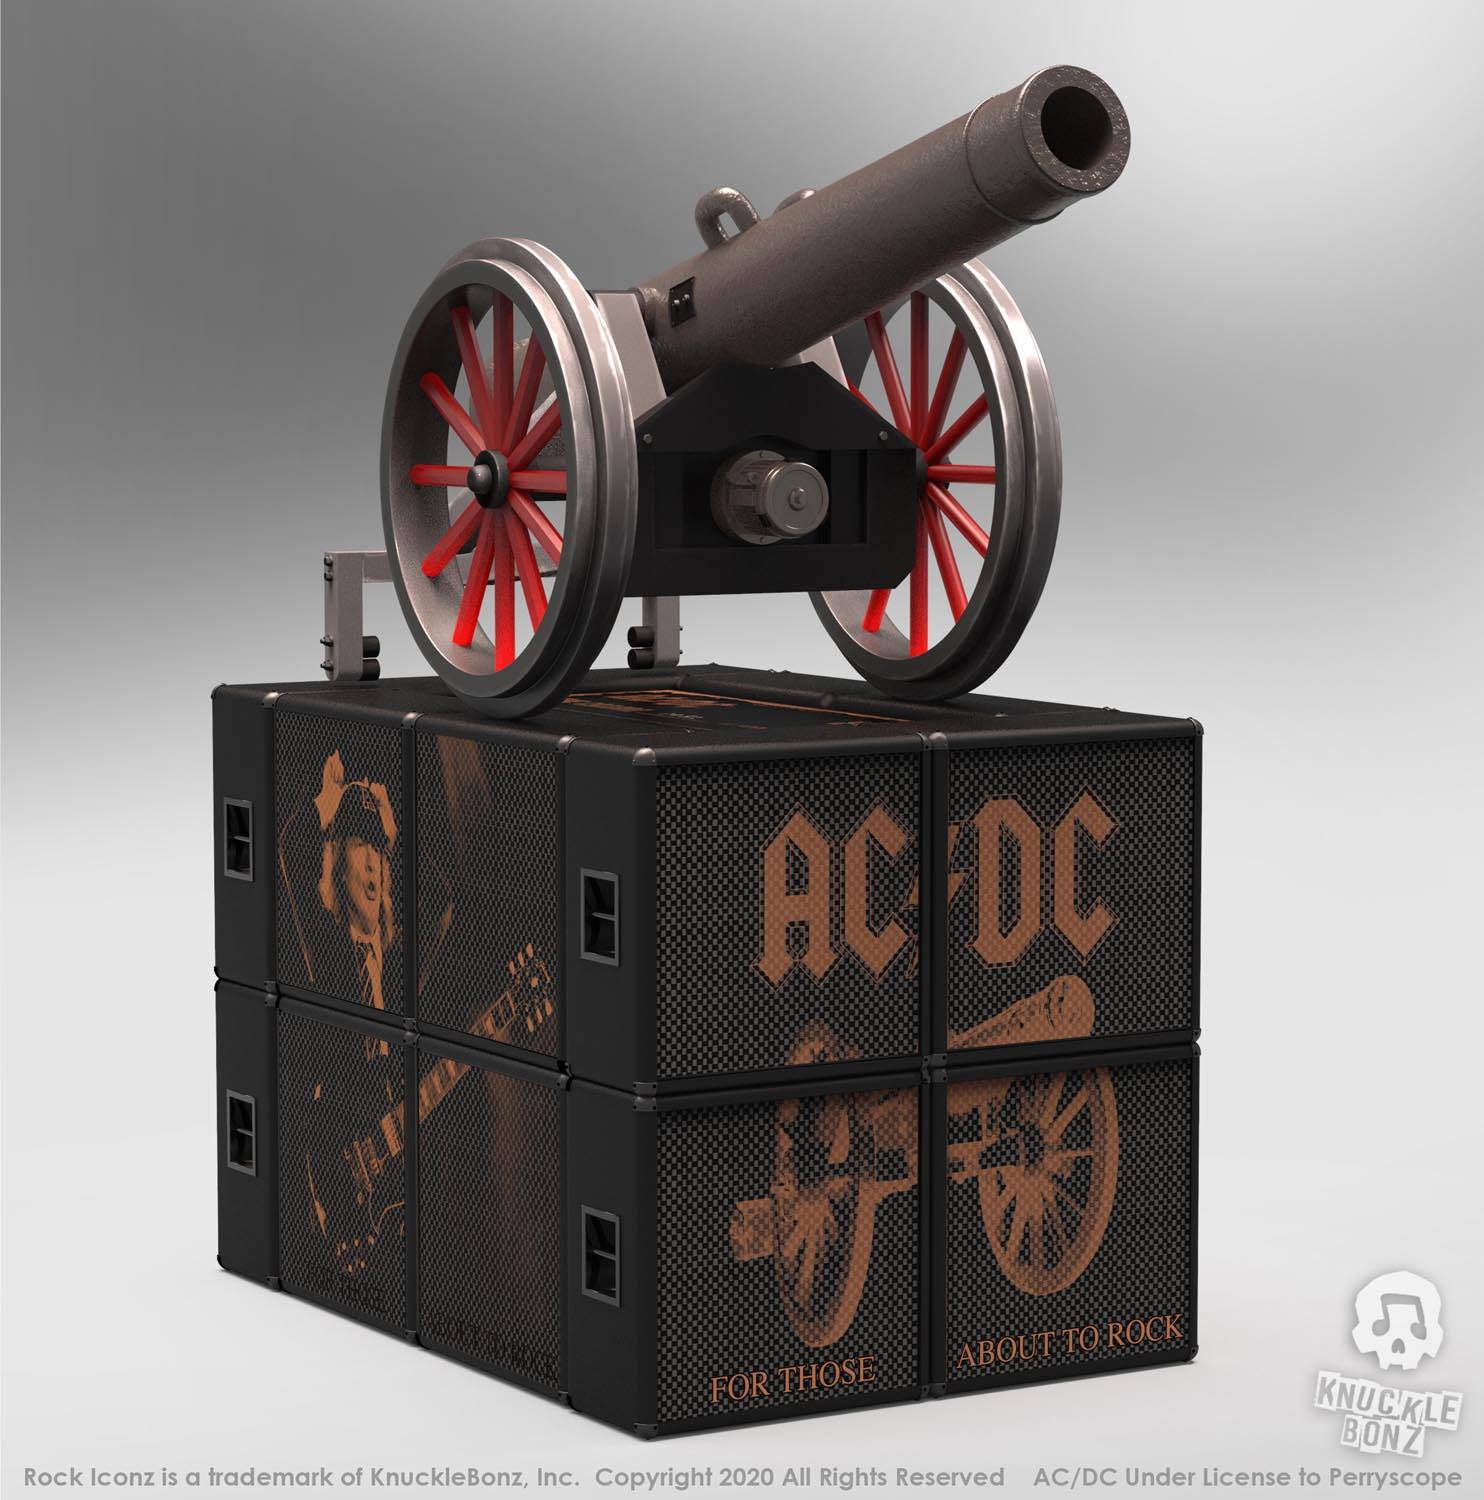 AC/DC Rock Ikonz On Tour Statues Cannon "For Those About to Rock" - Damaged packaging